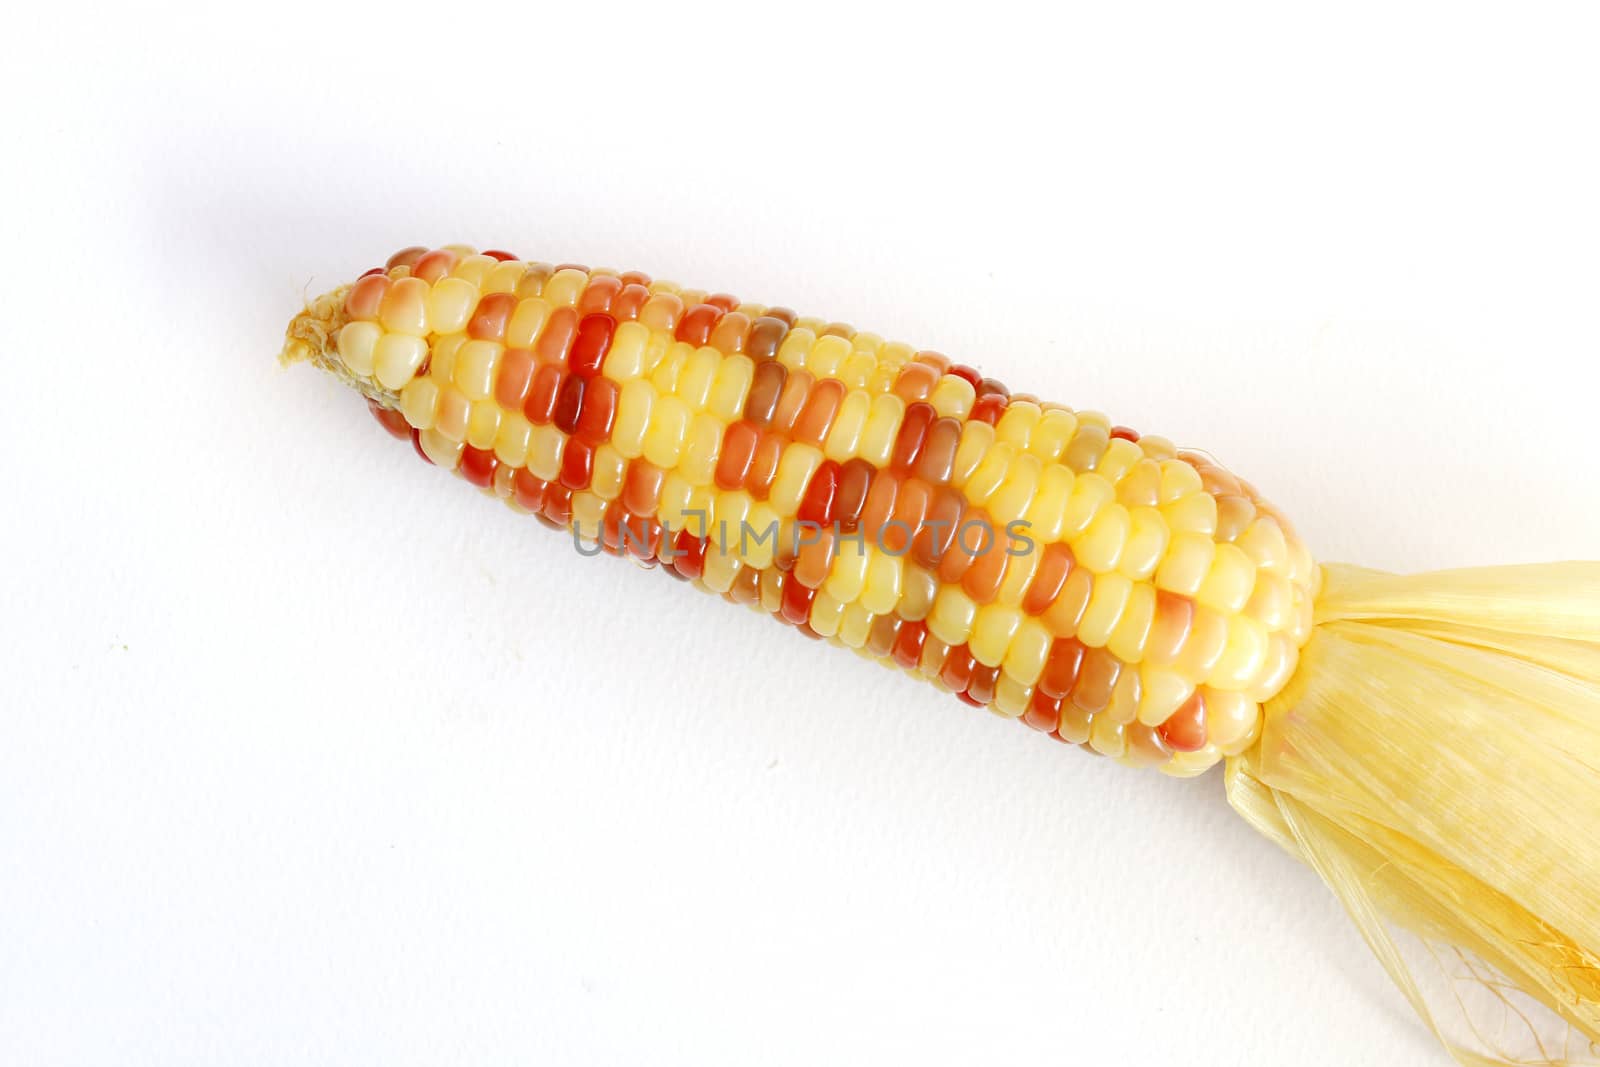 Maize corn have many colors in the grain of wheat of the same pod.